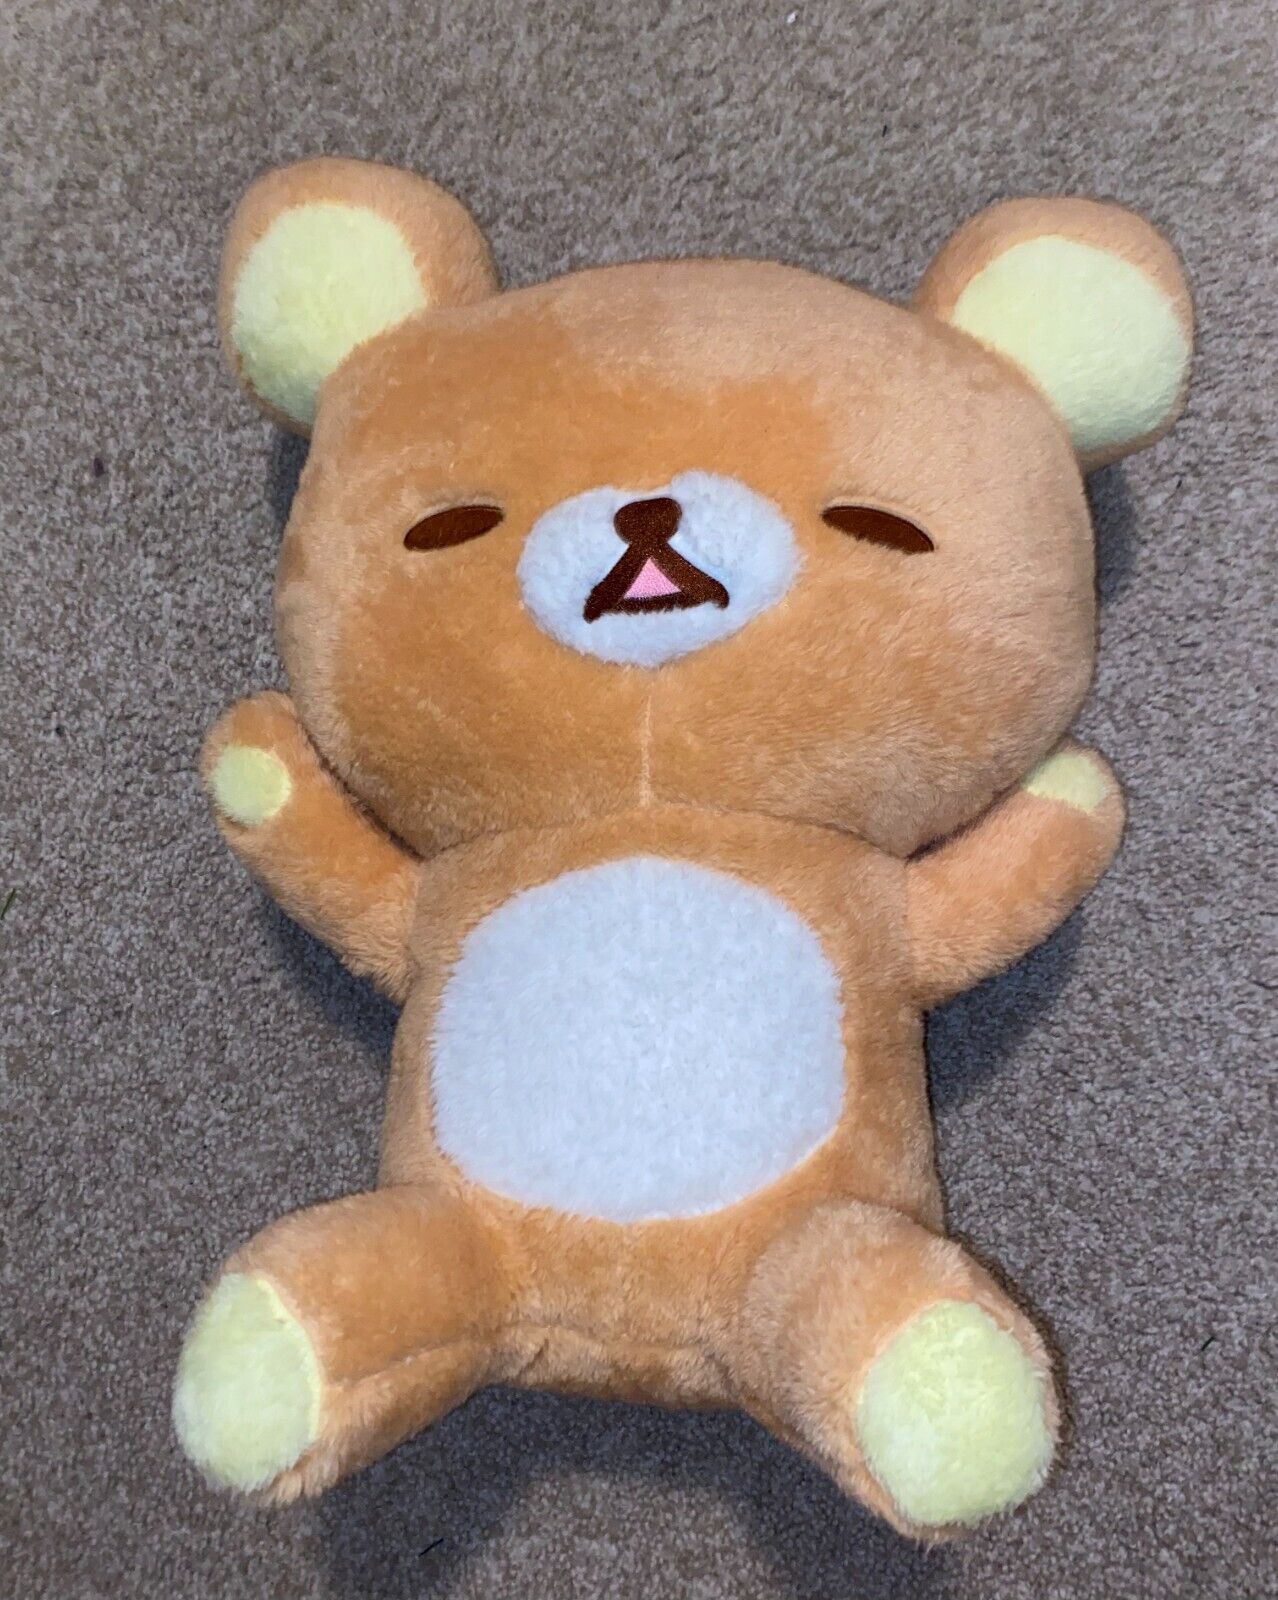 COLLECTOR RILAKKUMA PLUSHES (ONE IS A 15TH ANNIVERSARY) INCREDIBLY SOFT